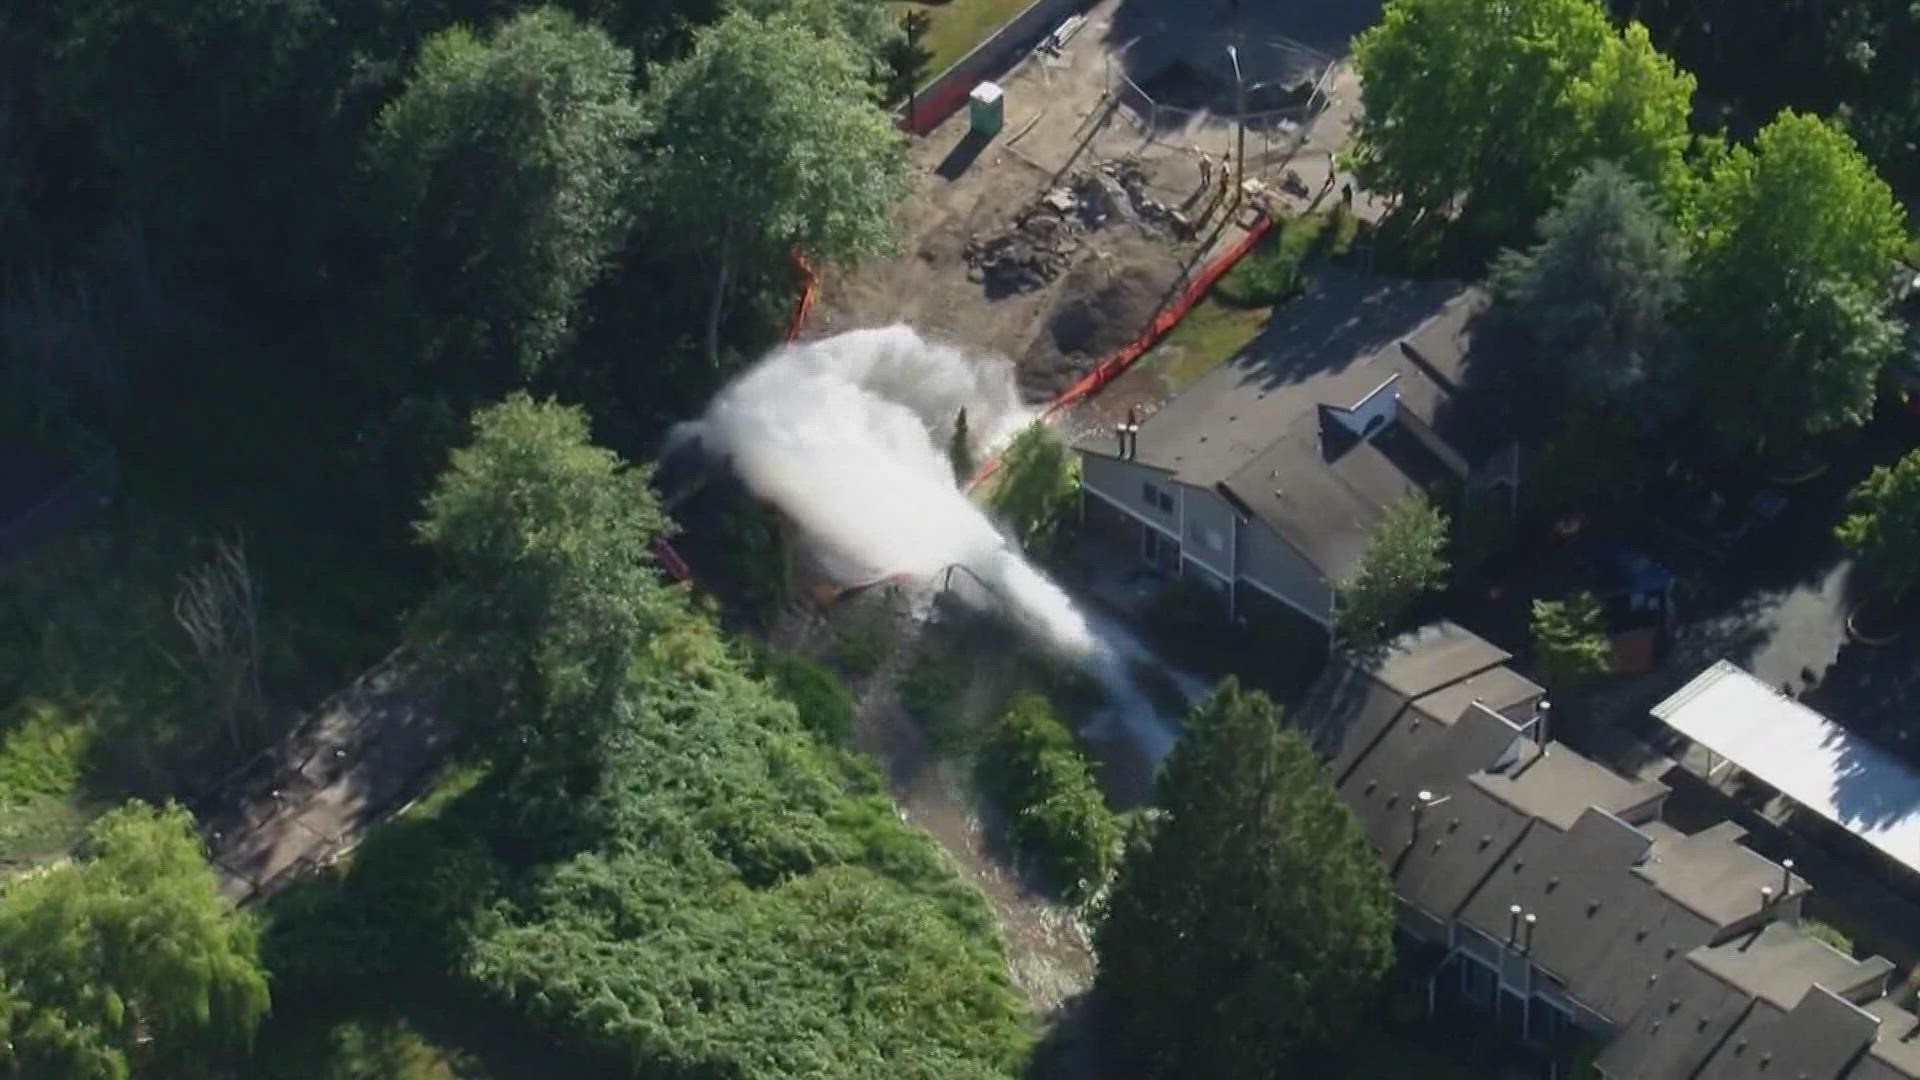 The water main could be seen gushing water nearby two apartment buildings on SkyKING video. Seattle Public Utilities is working to determine the cause.